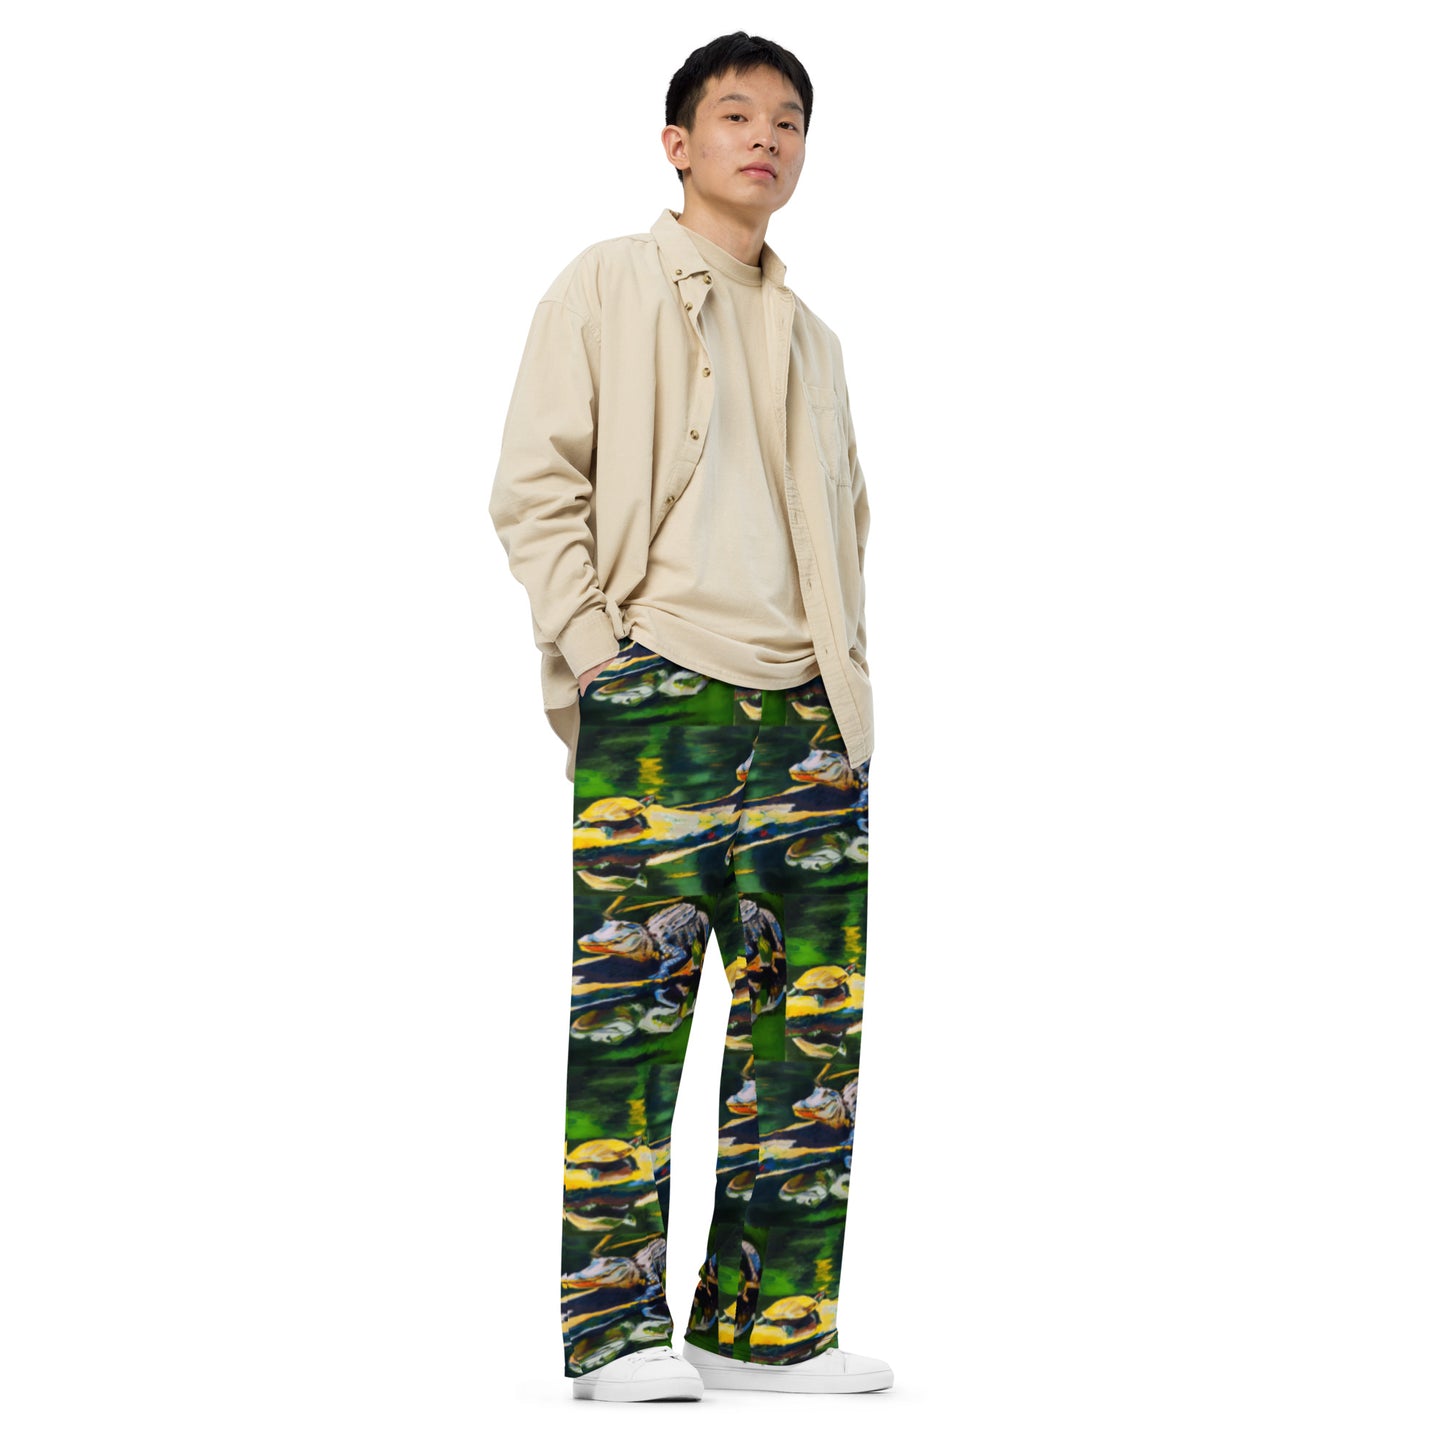 Turtle and Gator All-over print unisex wide-leg pants